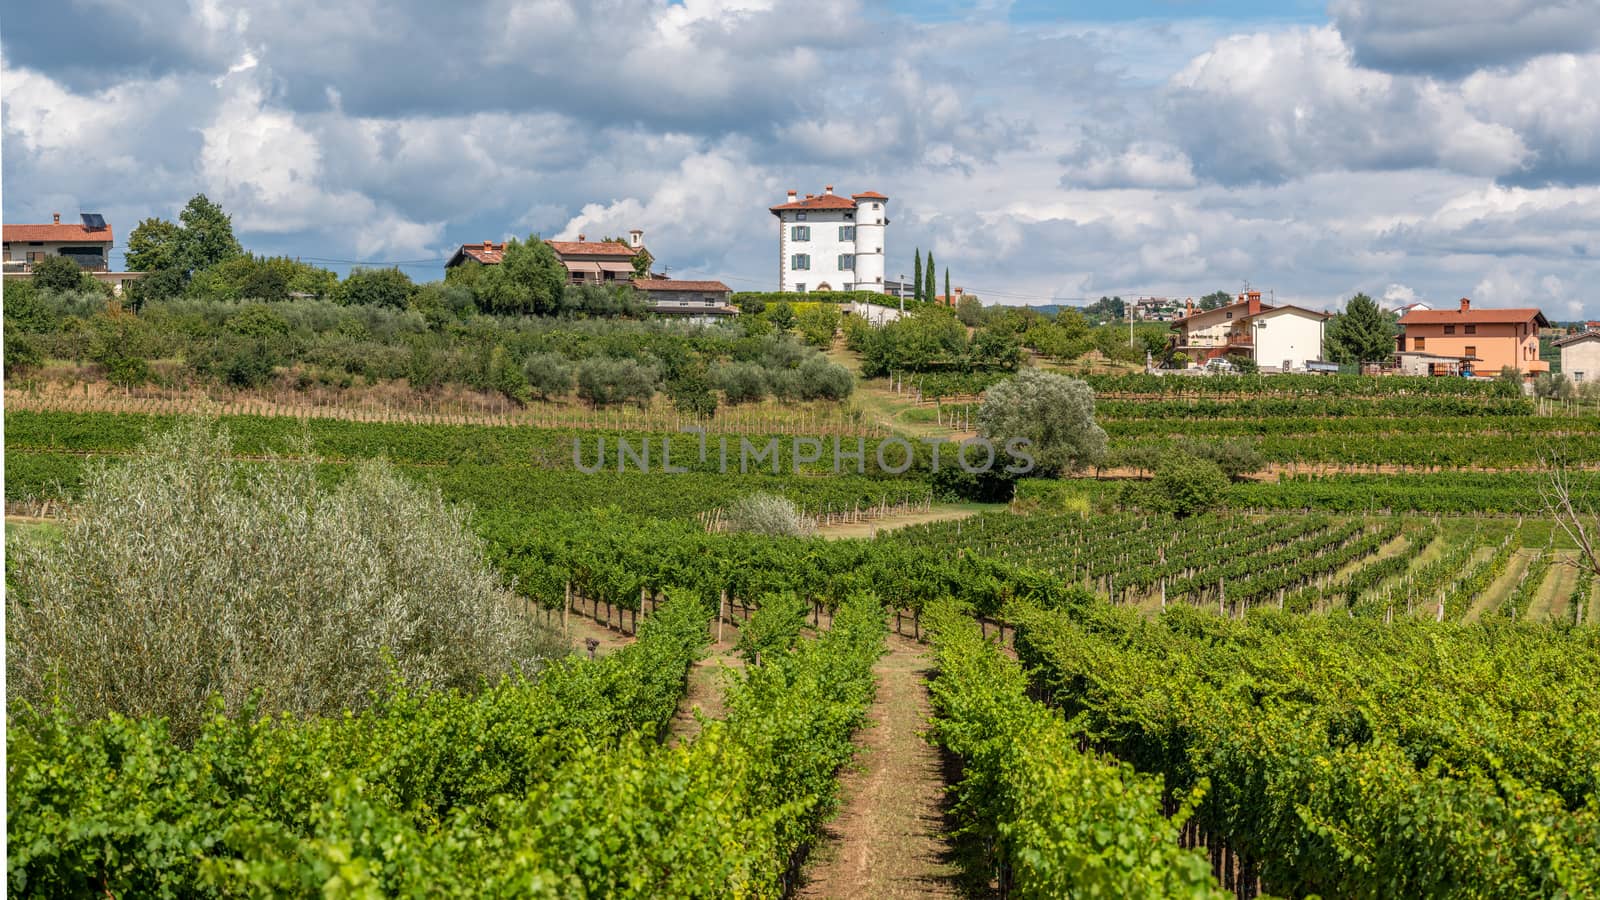 Vineyards and olive plantation in front of Village of Ceglo, also Zegla in famous Slovenian wine growing region of Goriska Brda, lit by sun and clouds in background by asafaric